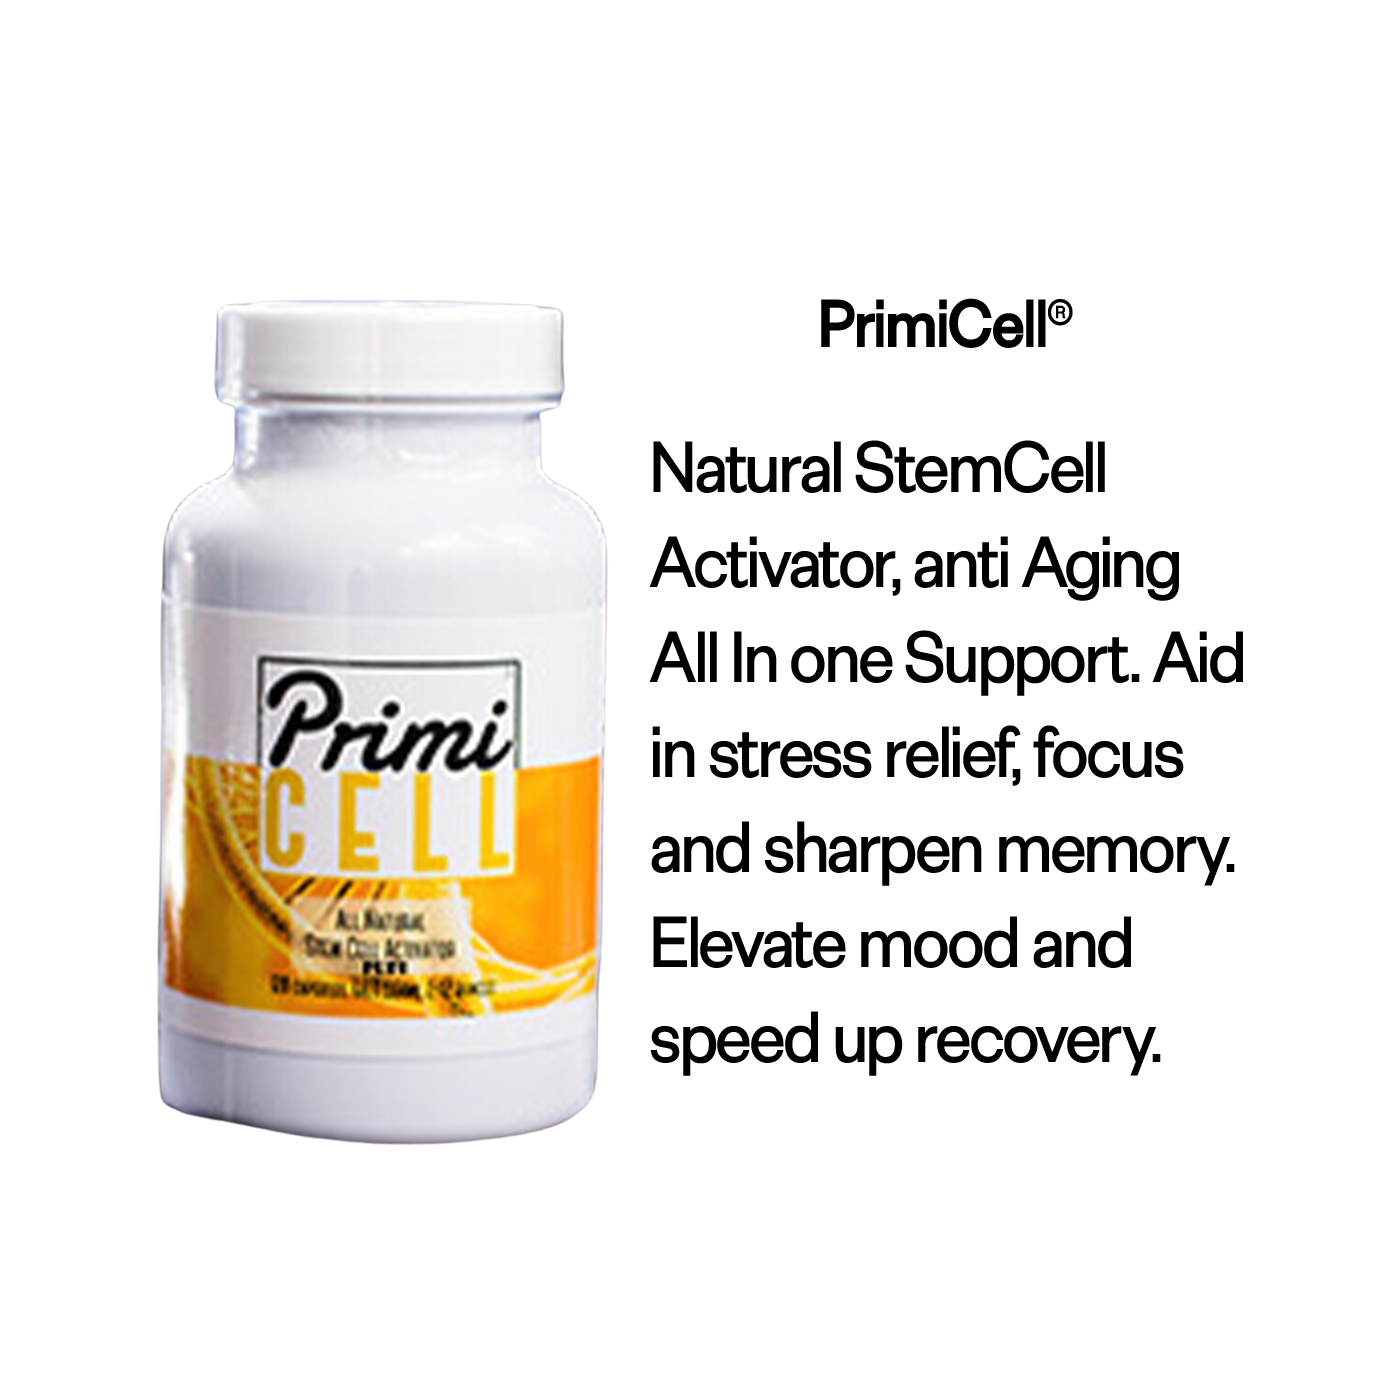 natural stem cell activator for anti-aging, all-in-one support